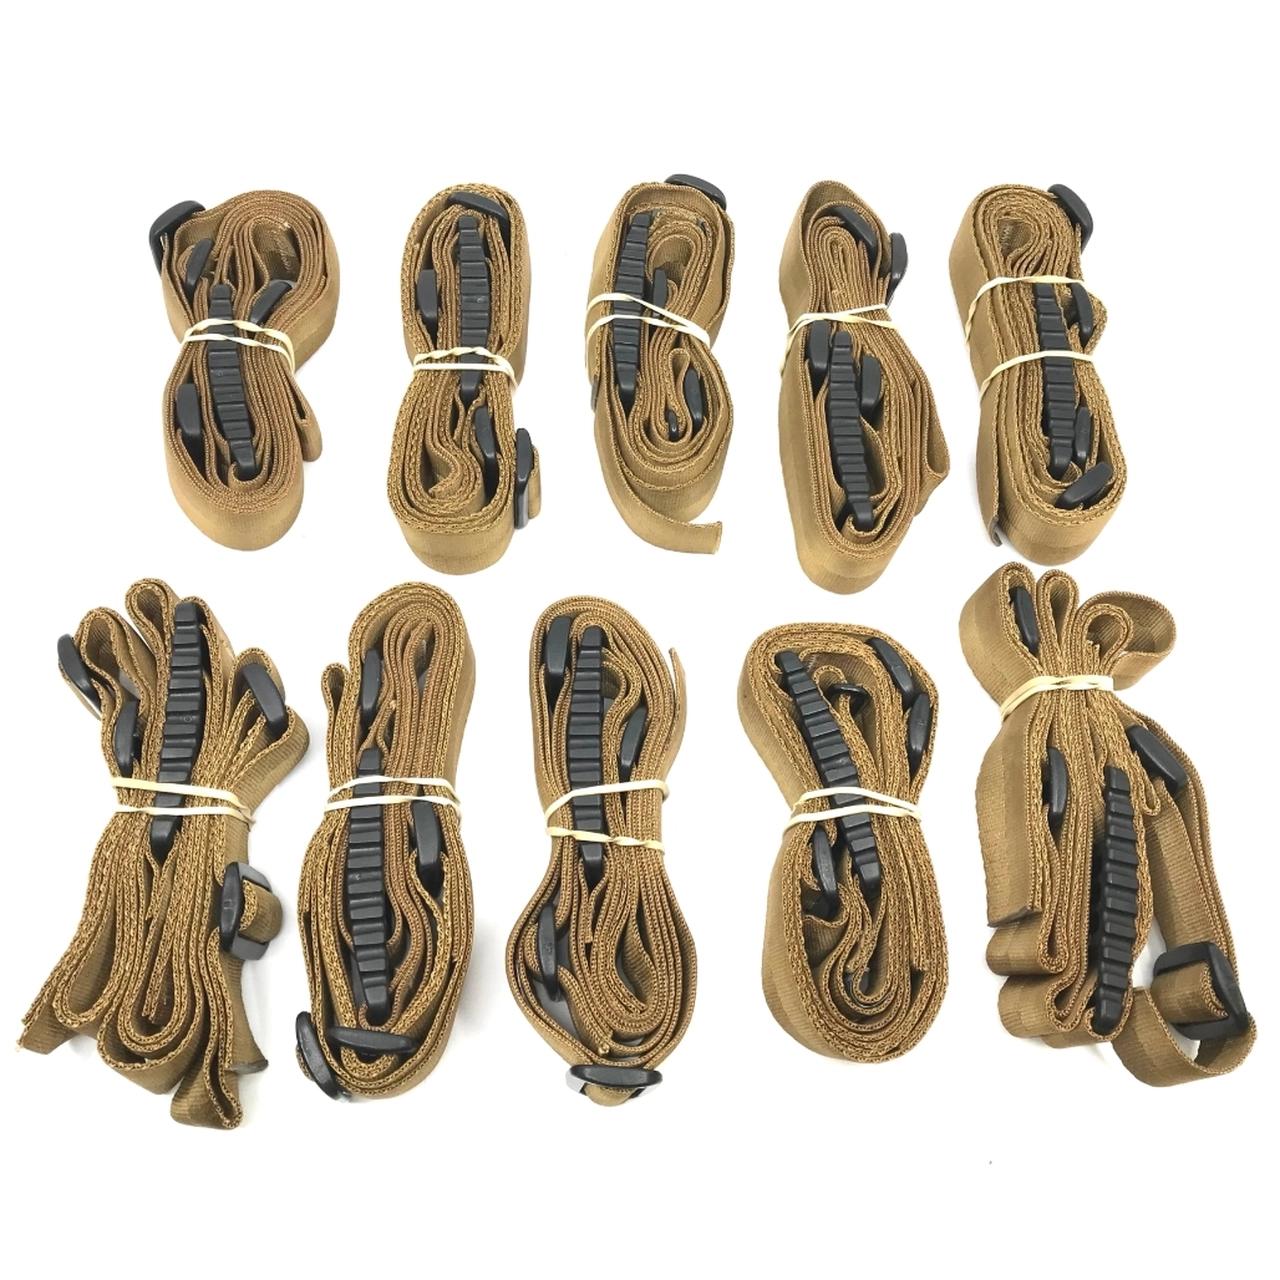 Open Box Govt. Contract Overrun Two Point Sling Lot Of 10 Pcs. Coyote Tan - $49.98 (Free S/H over $100)